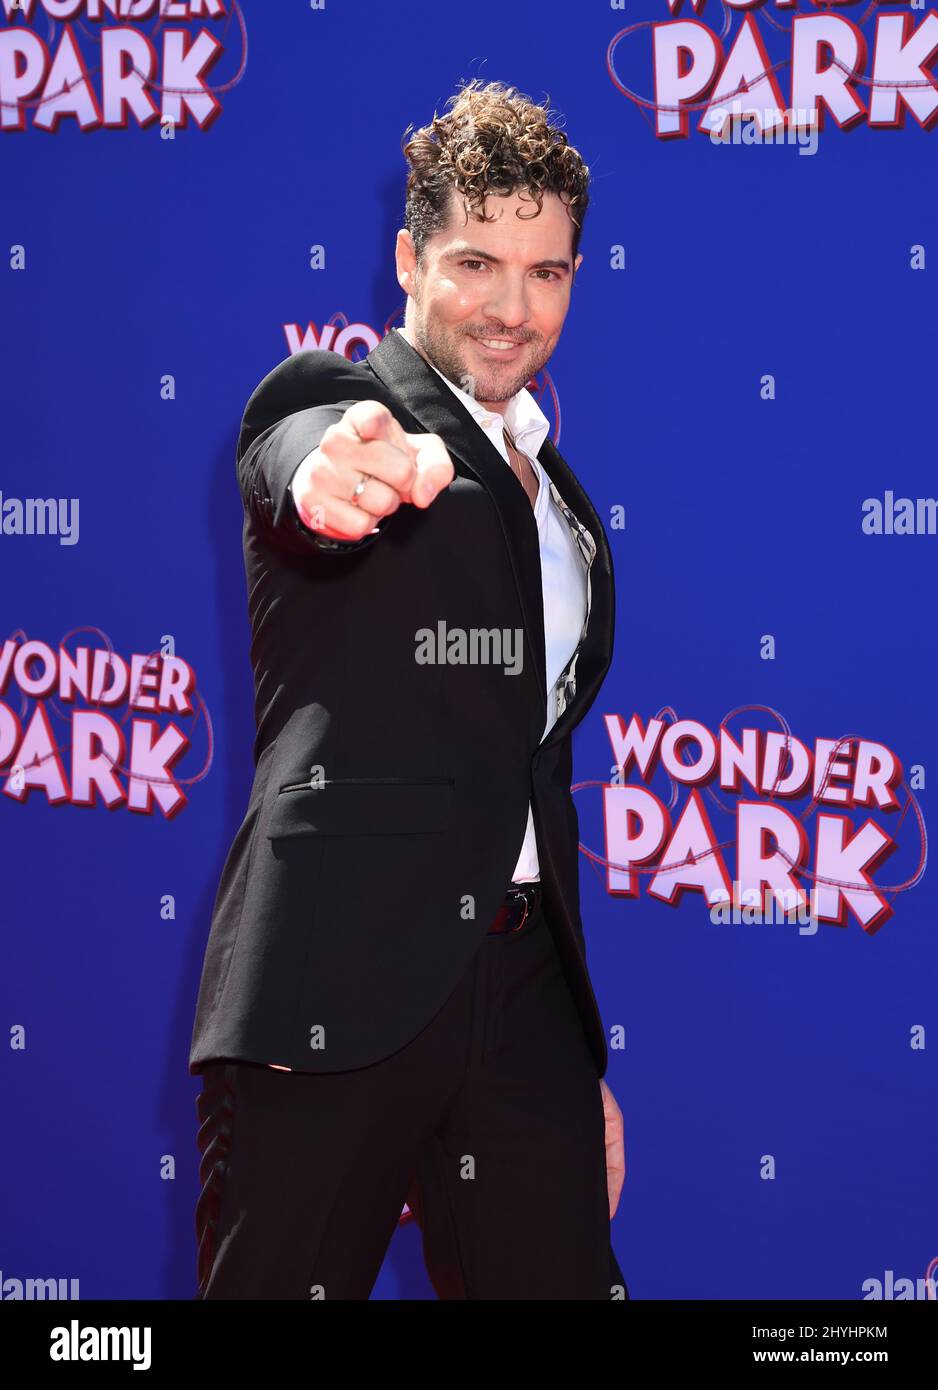 David Bisbal at the Los Angeles premiere of 'Wonder Park' held at the Regency Village Theatre on March 10, 2019 in Westwood, CA. Stock Photo